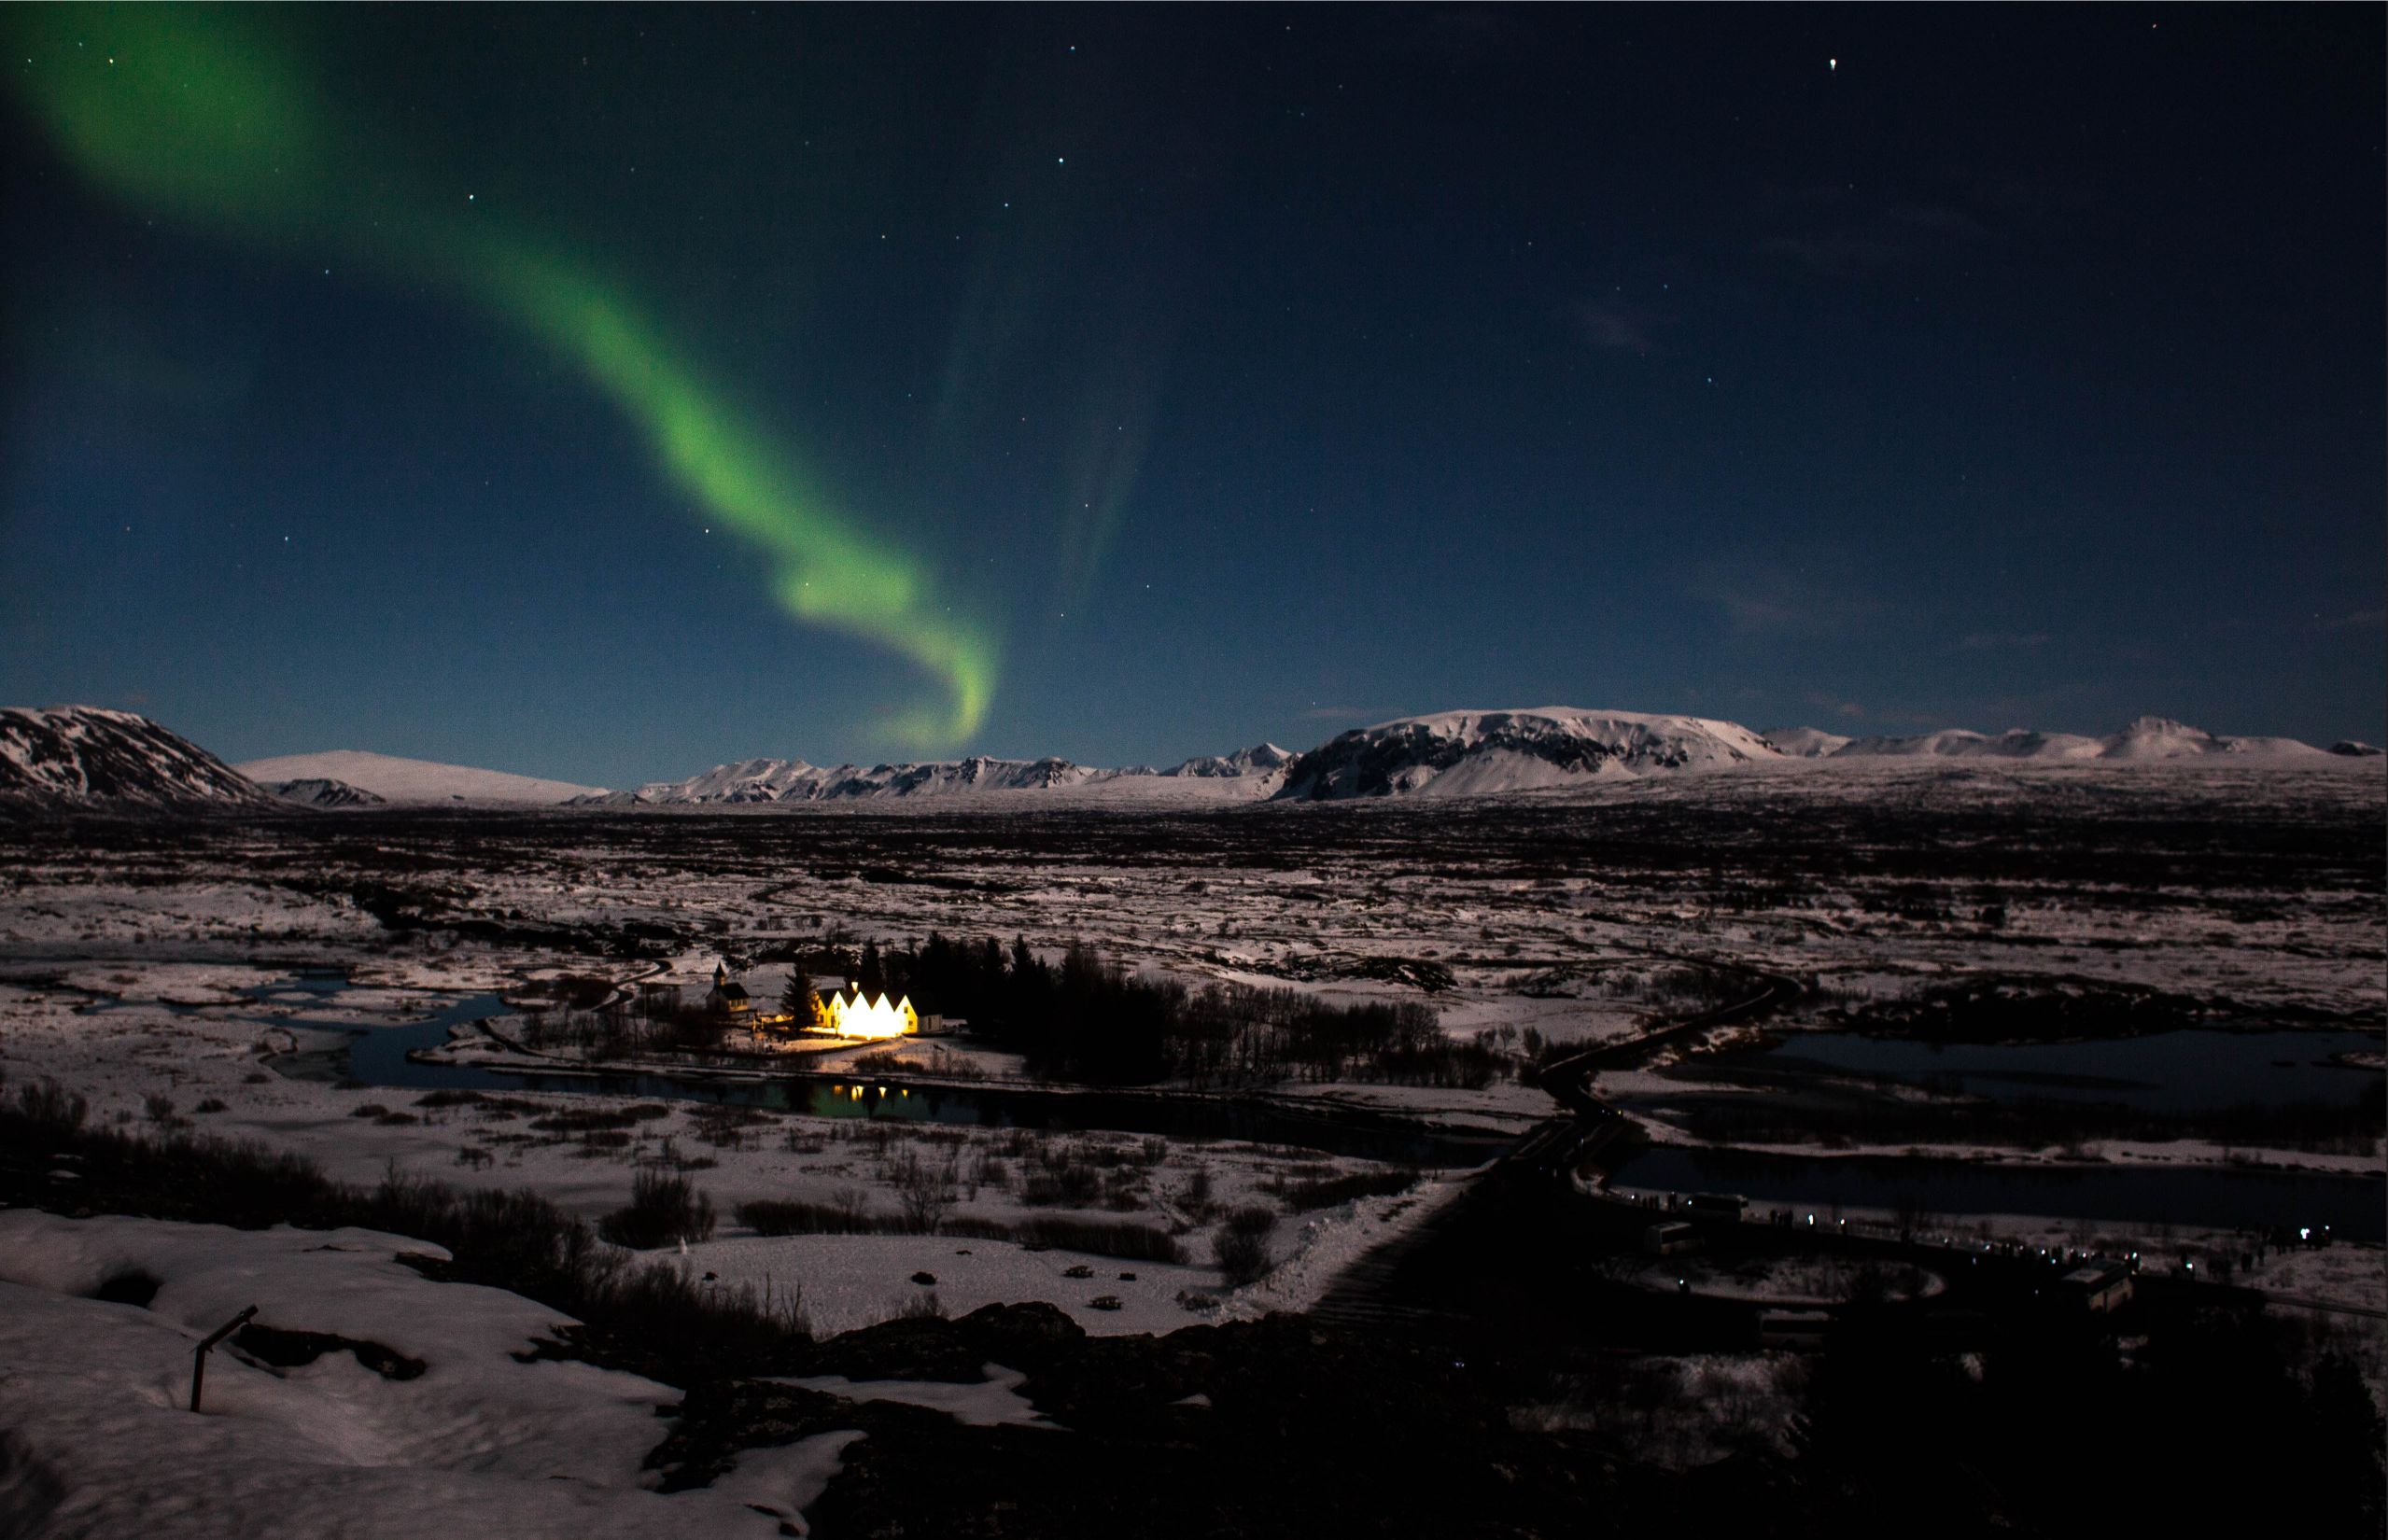 The northern lights blaze faintly above a snow covered landscape and a small village.